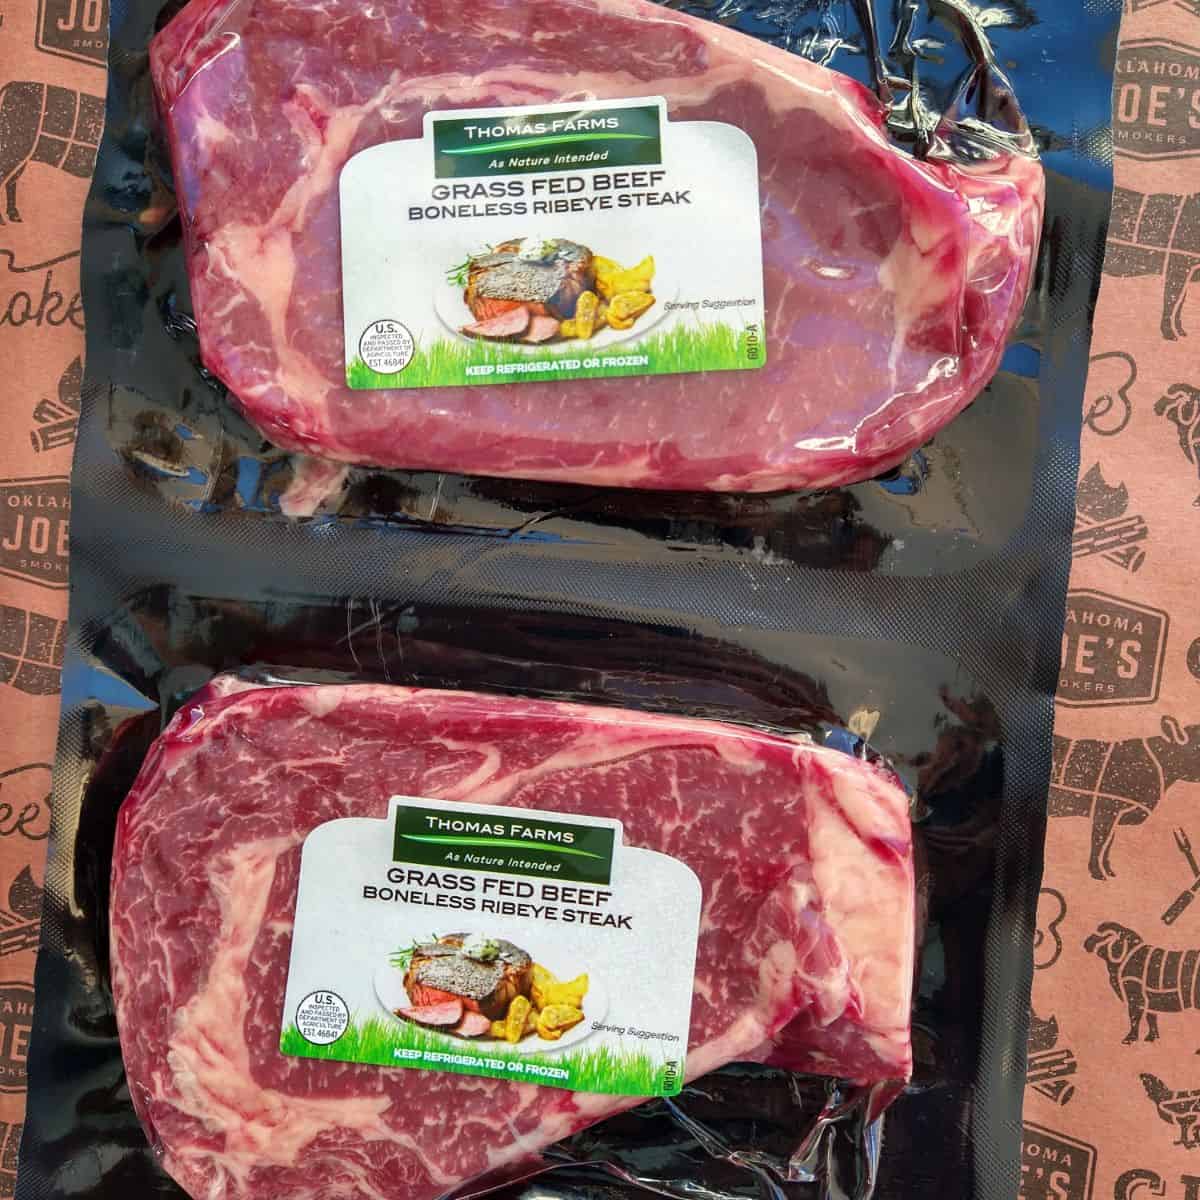 A two pack in packaging of Thomas Farms Grass Fed Beef Boneless Ribeye Steak from ALDI on a reddish brown sheet of butcher paper.